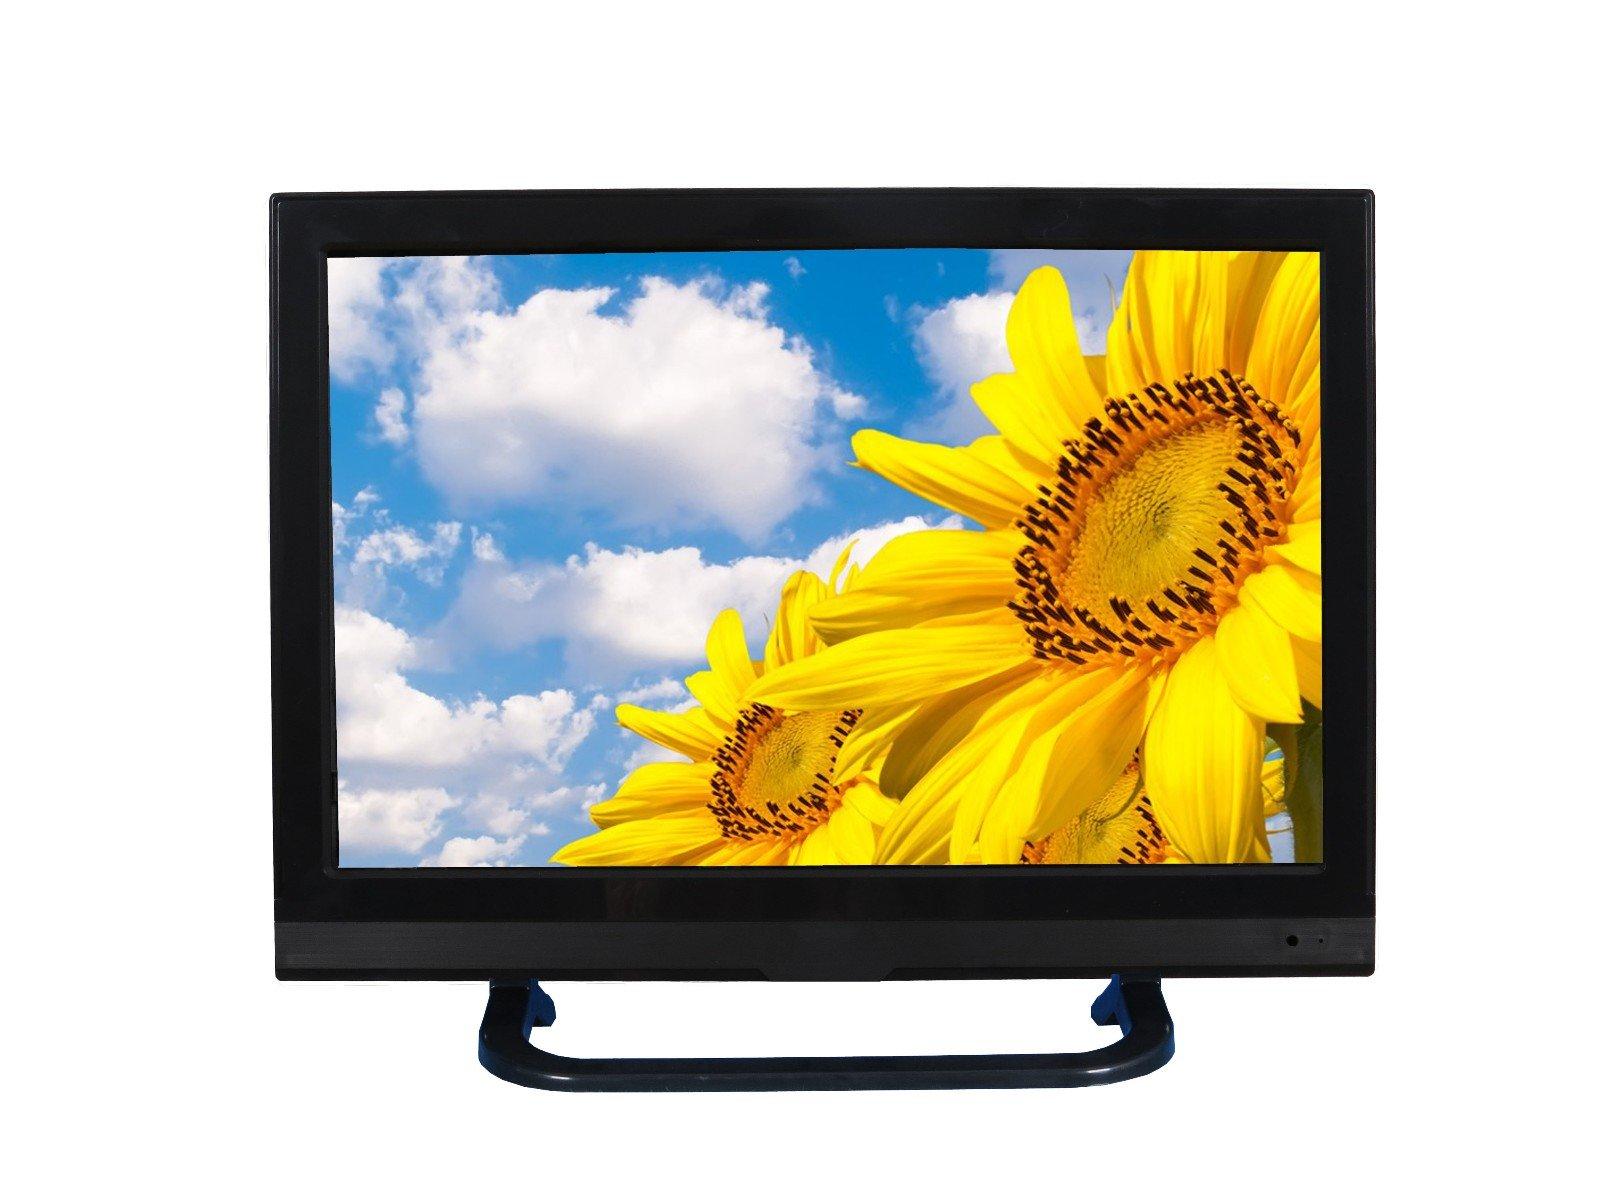 Xinyao LCD factory price 20 inch full hd tv for lcd screen